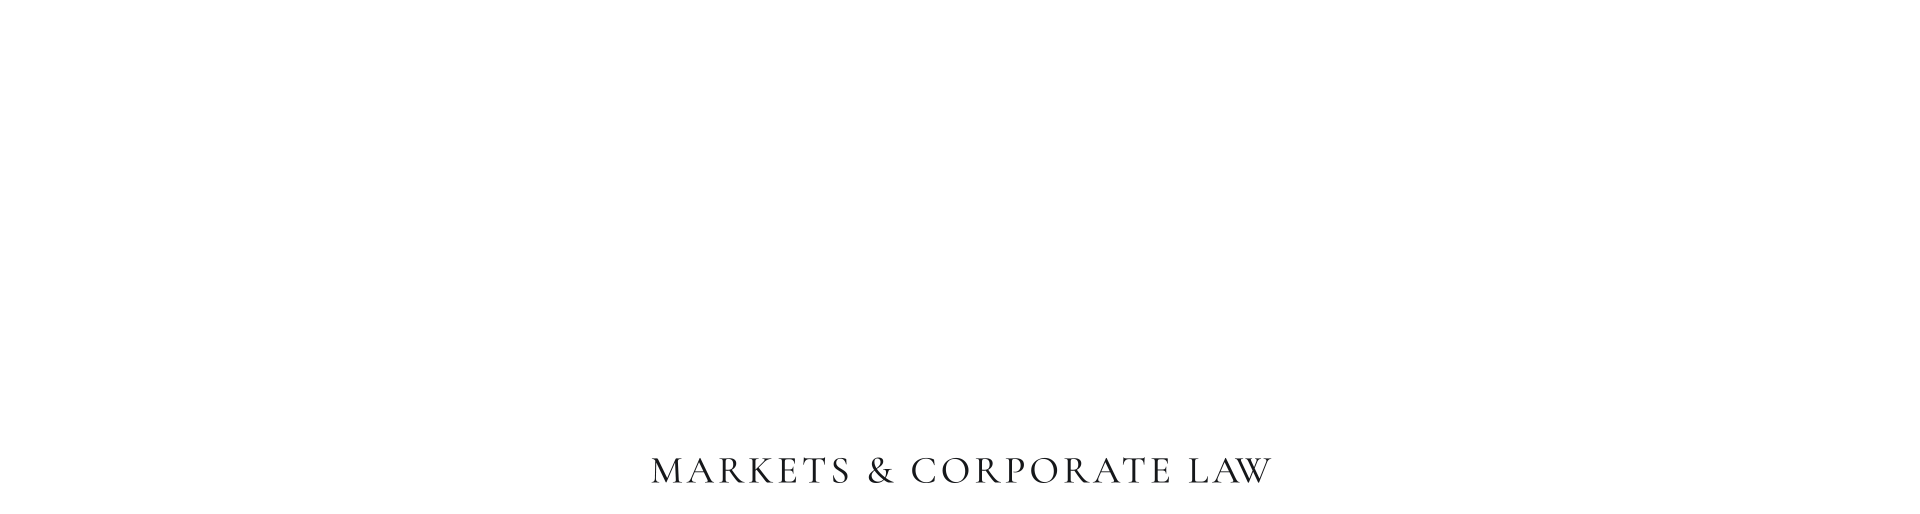 MCL - Markets & Corporate Law